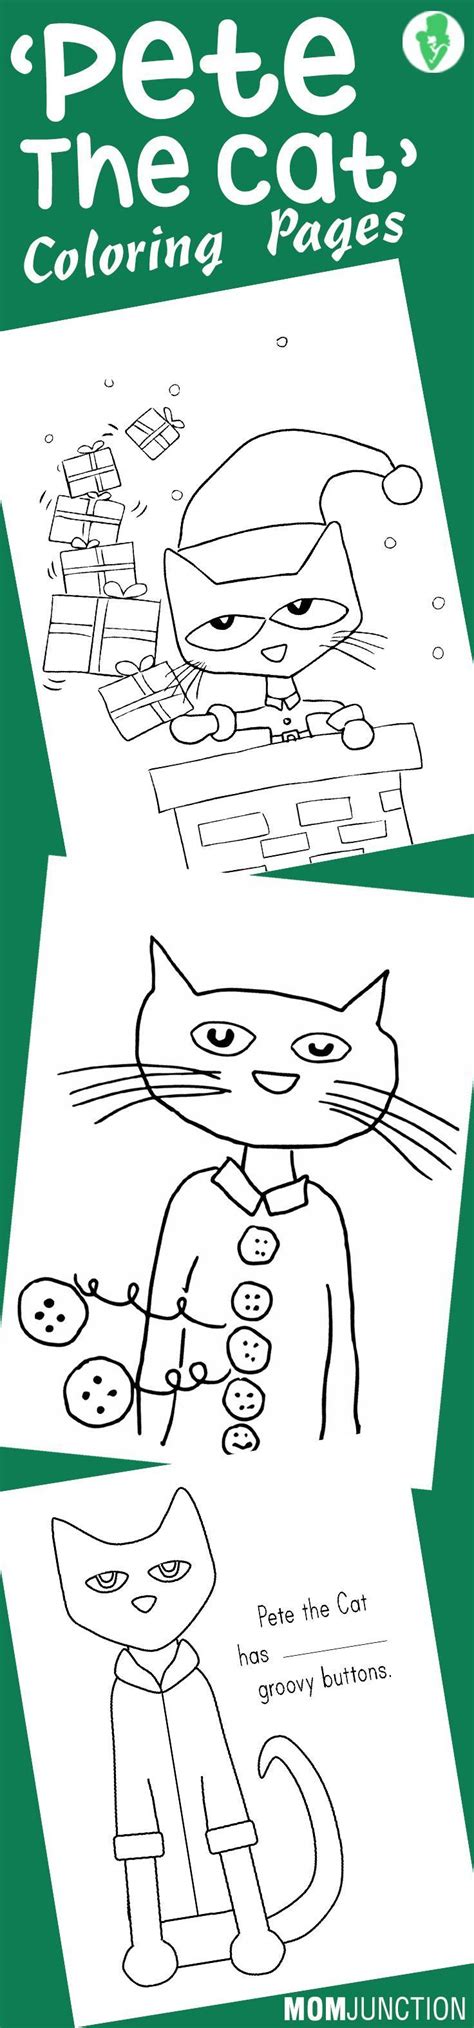 top   printable pete  cat coloring pages  pete  cat